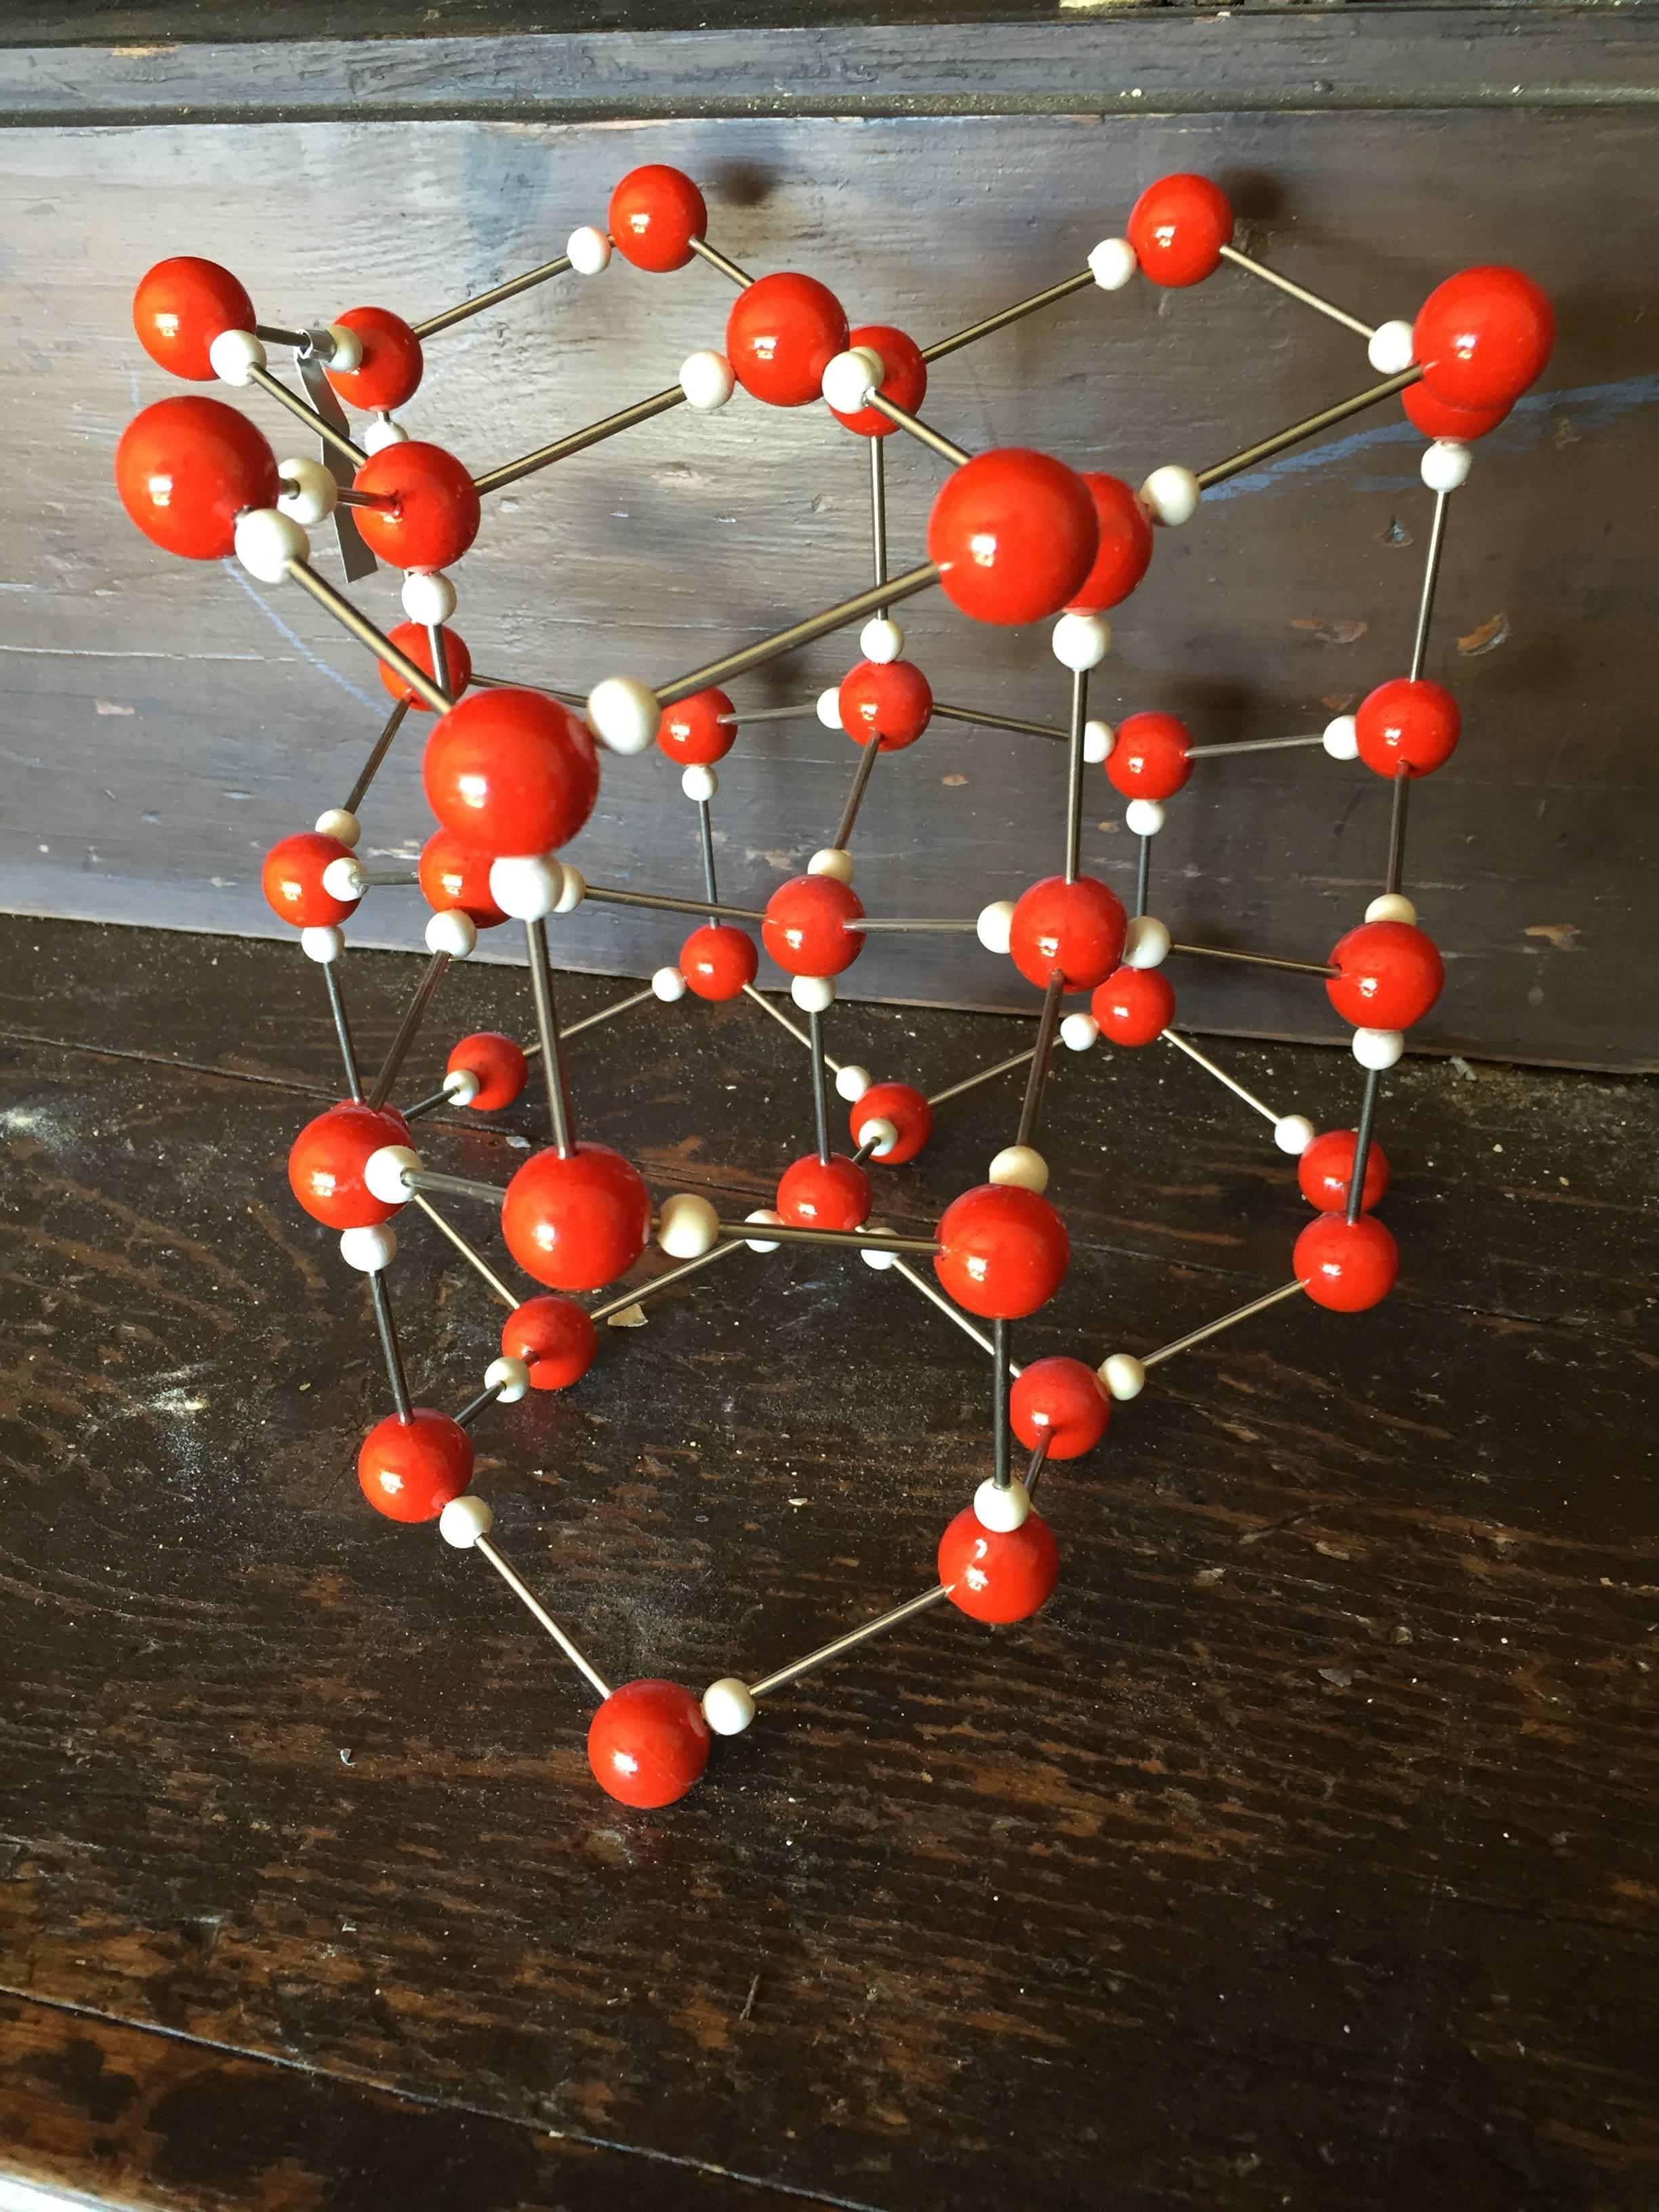 Vintage ball and stick molecular model depicting elemental structure of solid H20, ice, circa 1950s.